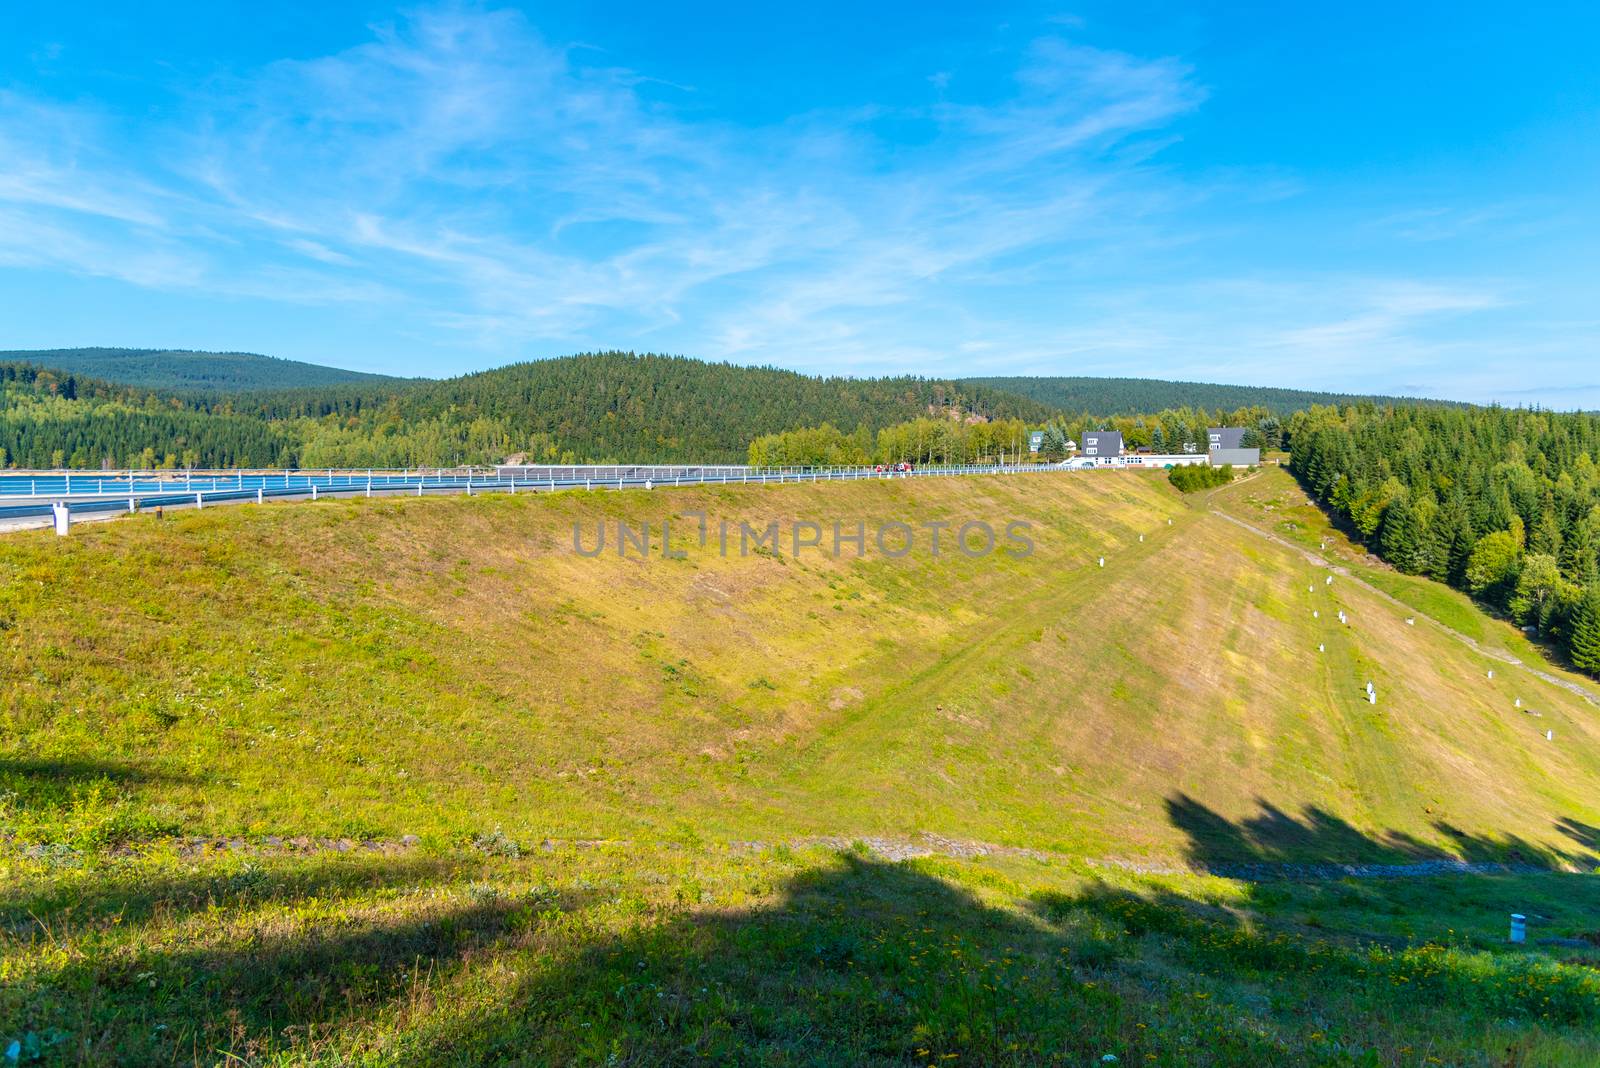 Josefuv Dul Dam, Earth-filled dam in Jizera Mountains with asphalt road on the top, Czech Republic. Sunny summer day by pyty